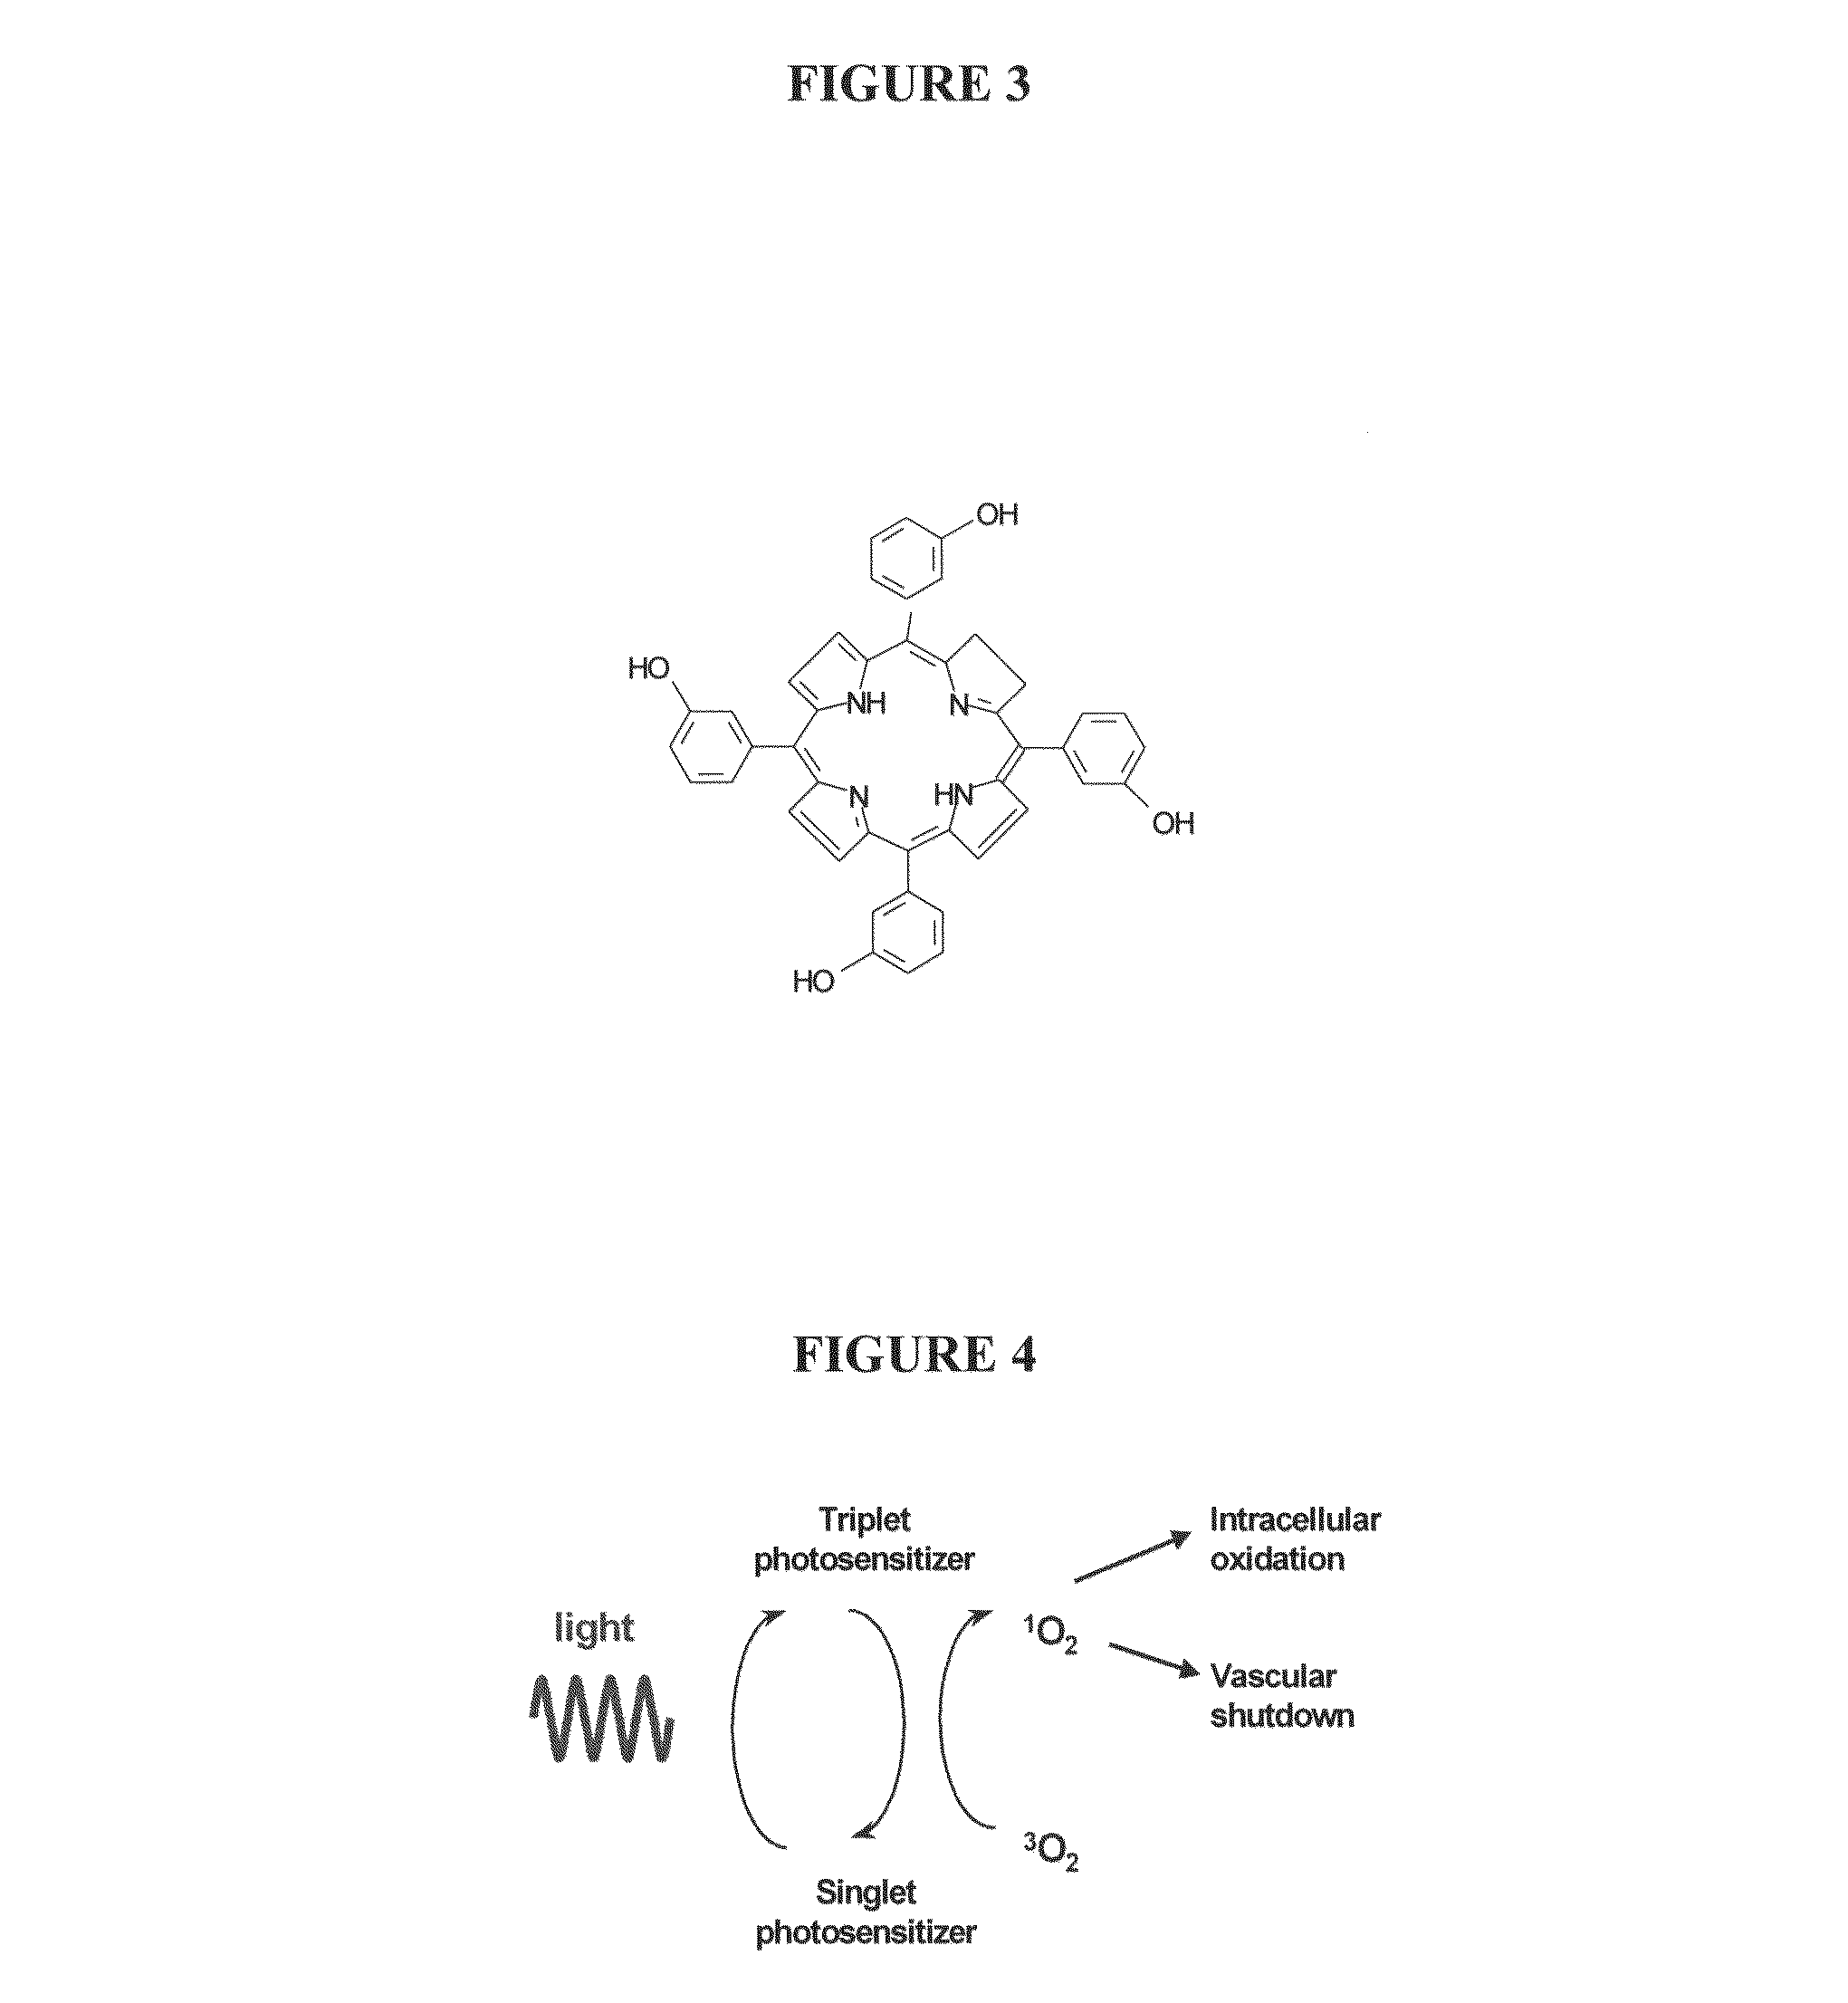 PDT treatment method for cellulites and cosmetic use